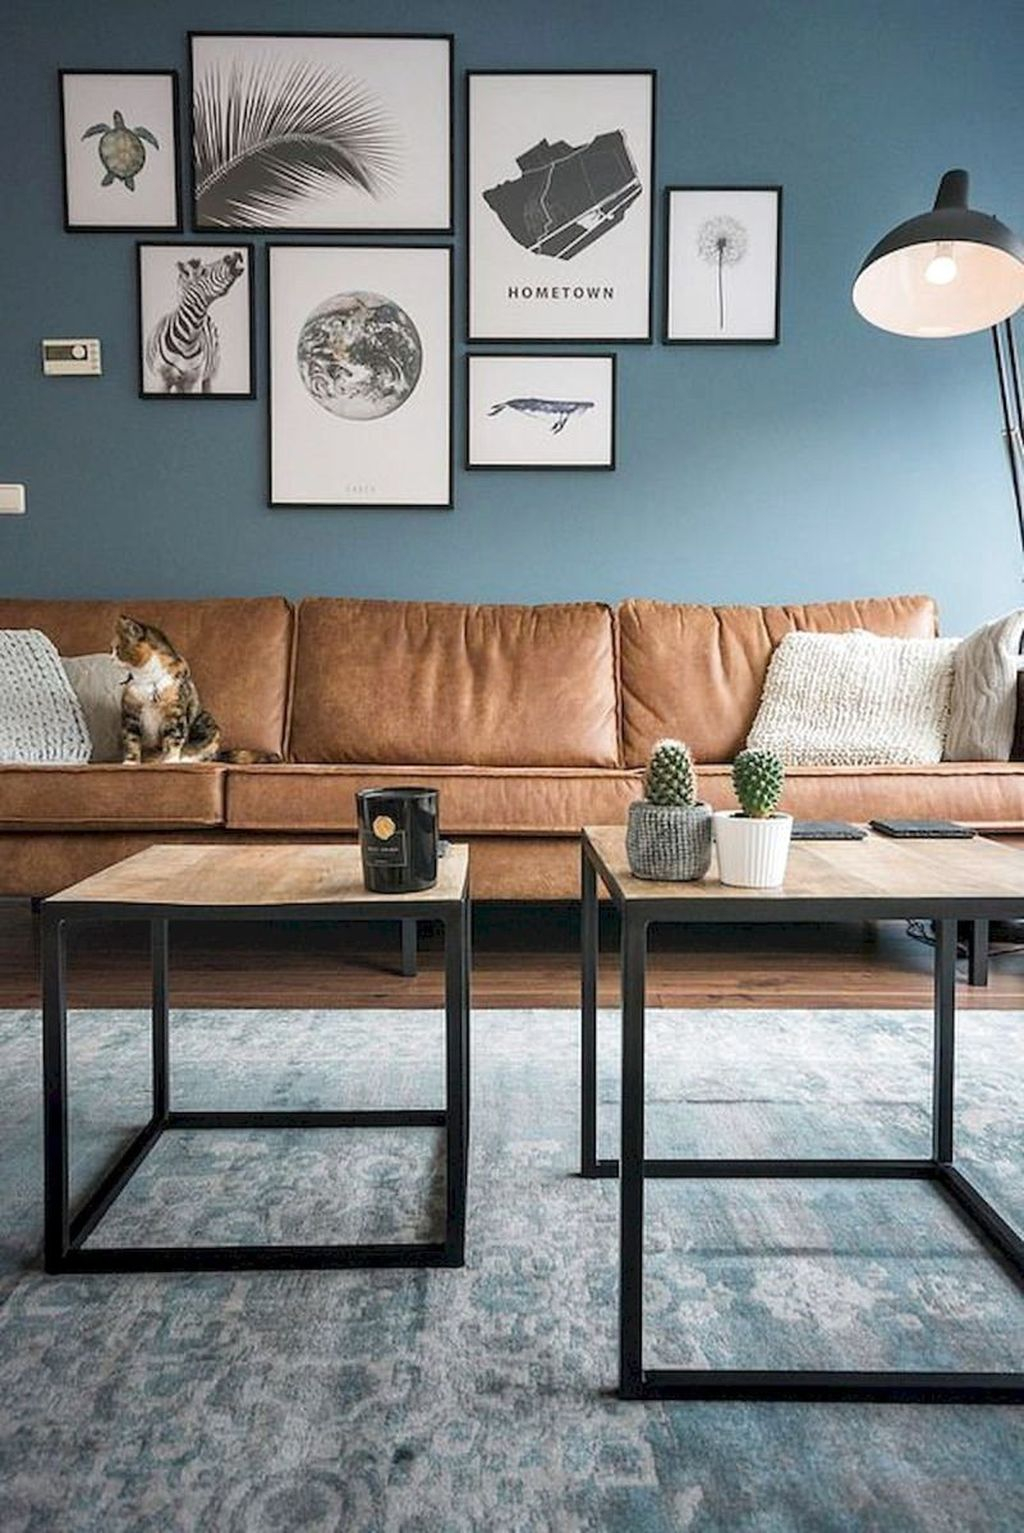 The Best Decorations Industrial Style Living Room That Will Amaze Your Guests25